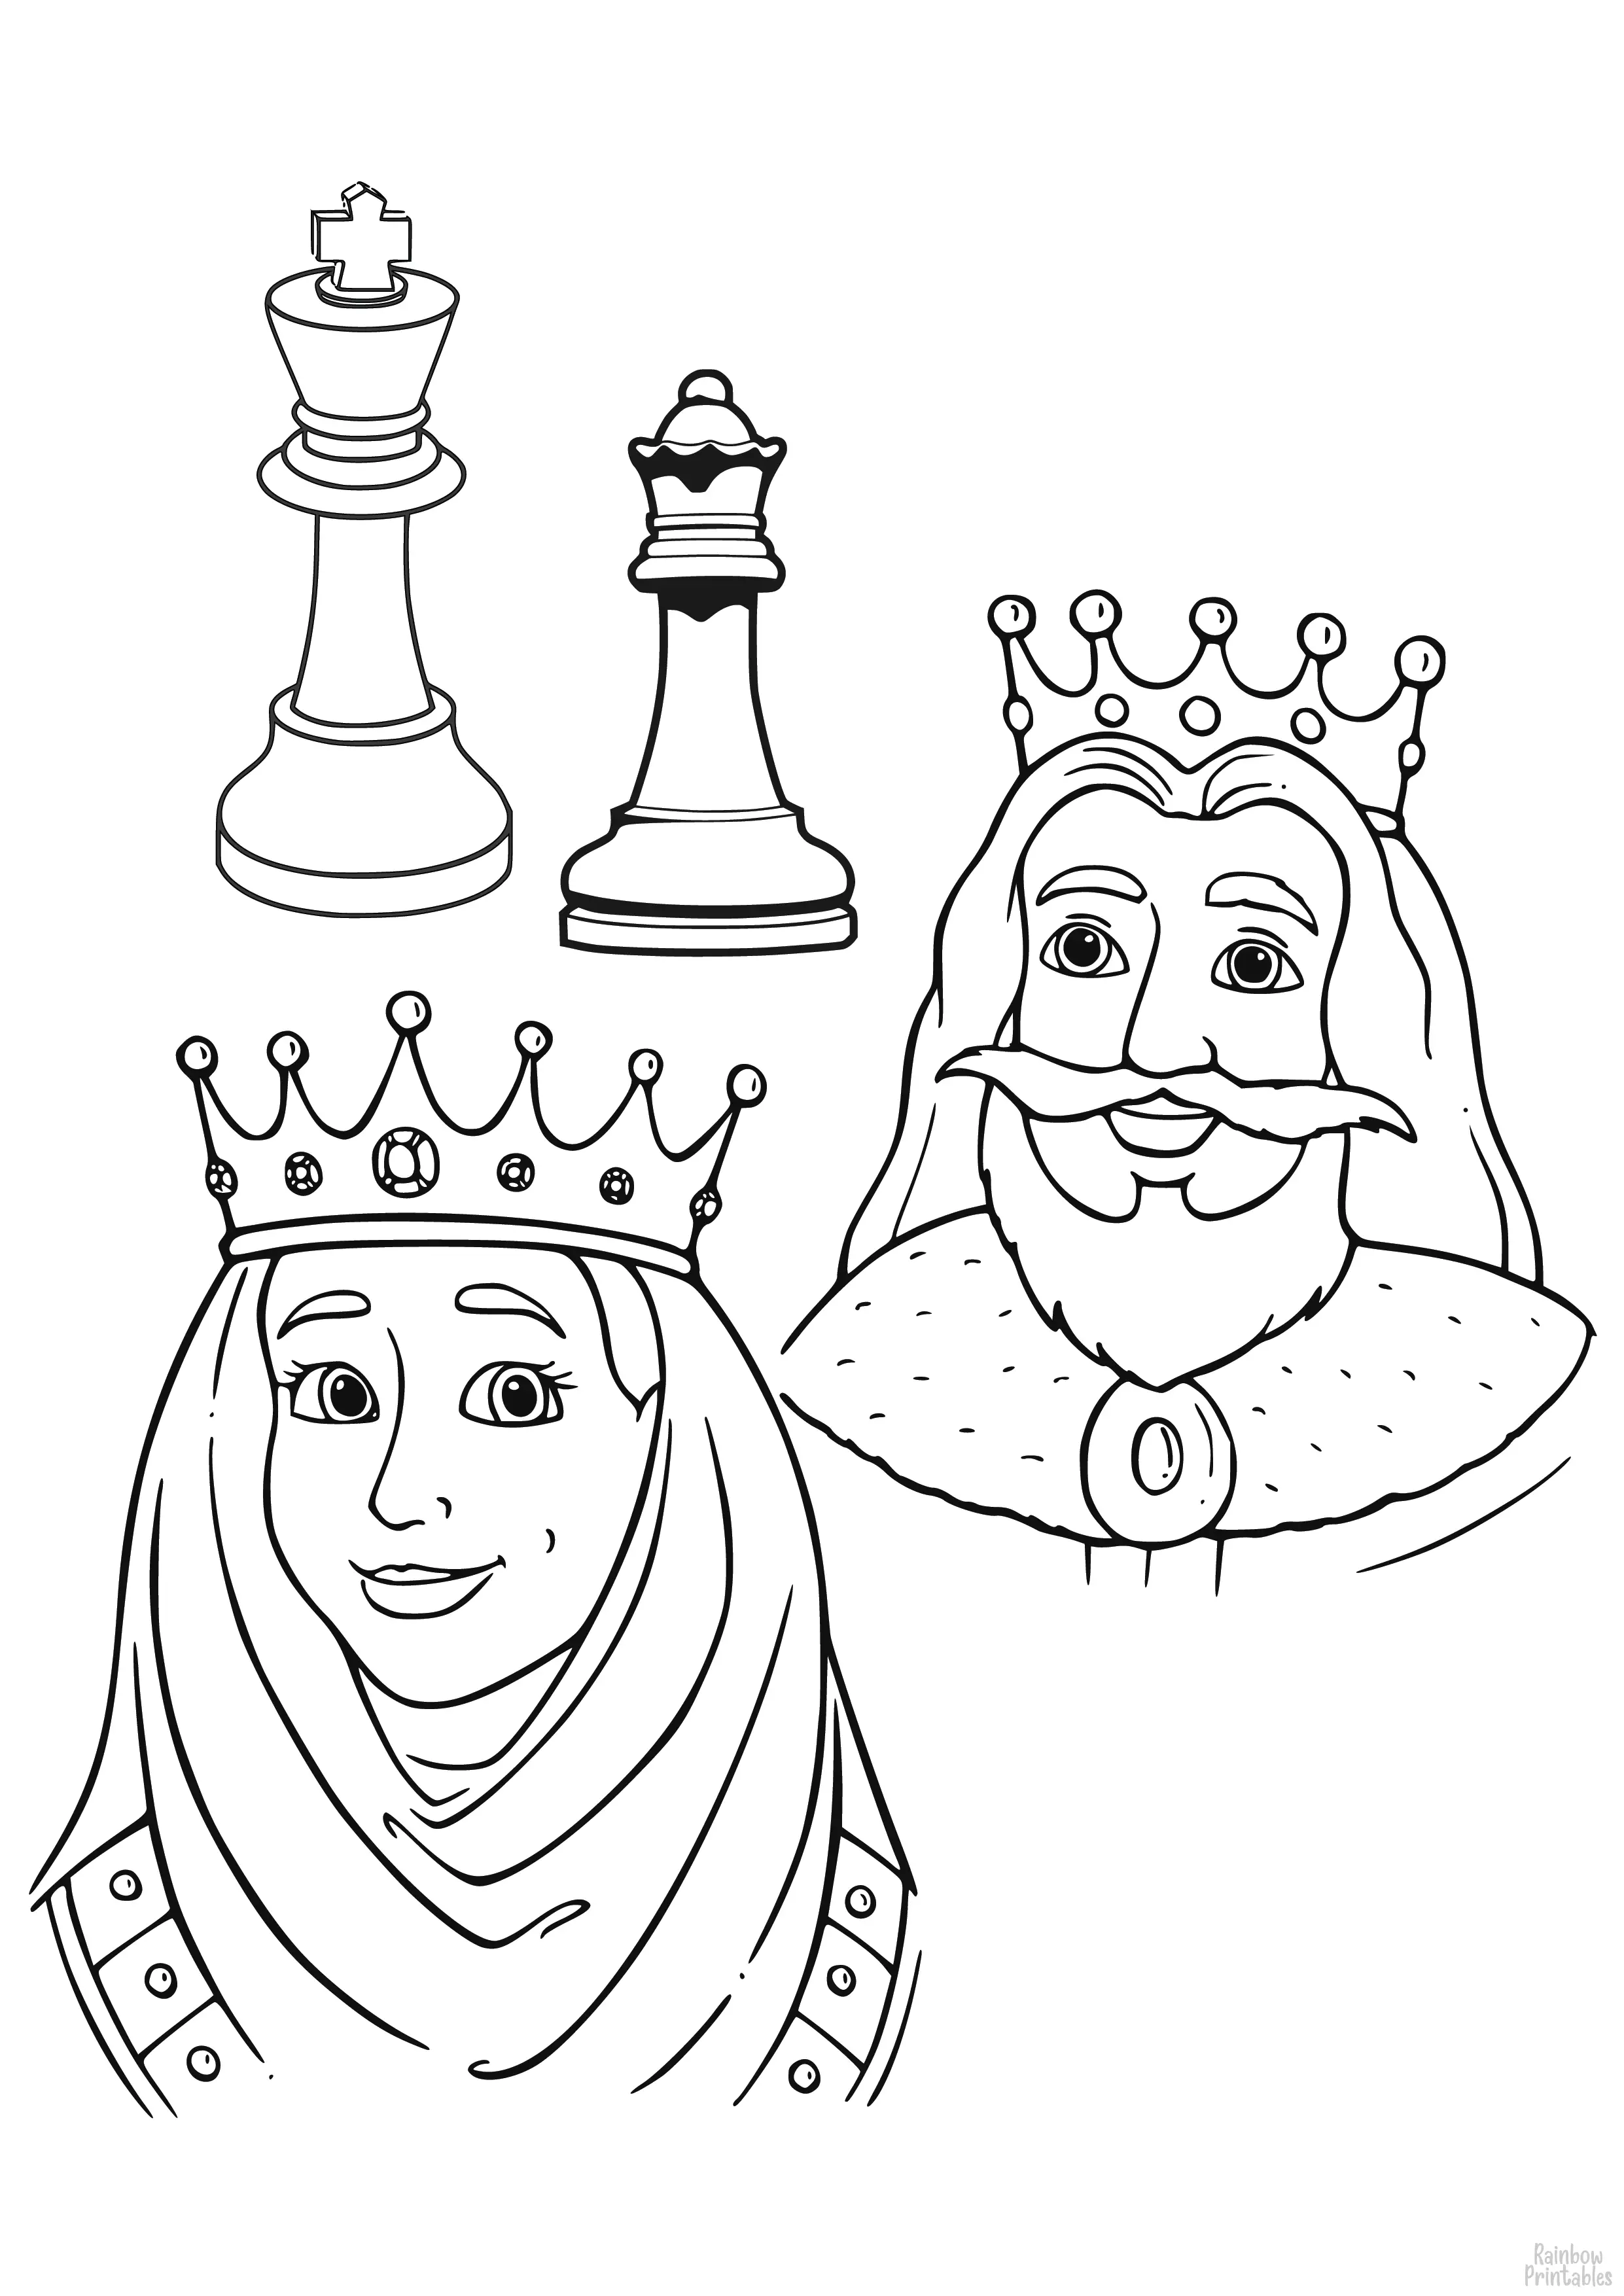 CHESS PIECES KING QUEEN CARTOON Clipart Coloring Pages for Kids Art Activities Line Art